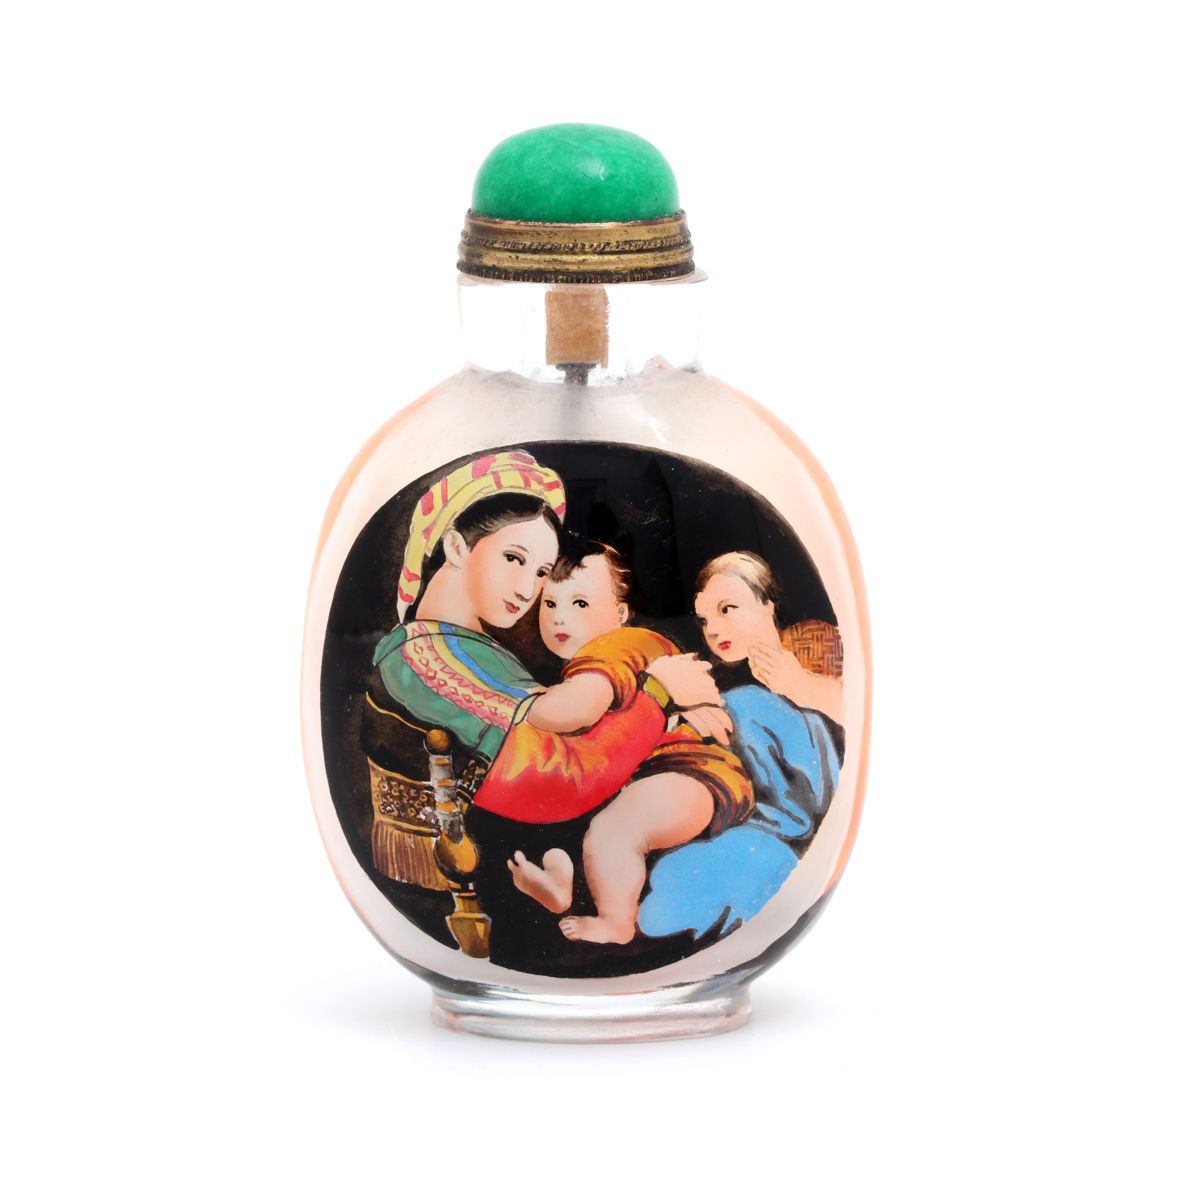 A SNUFF-BOTTLE A SNUFF-BOTTLE Chinese glass, polichrome decoration depicting cop&hellip;